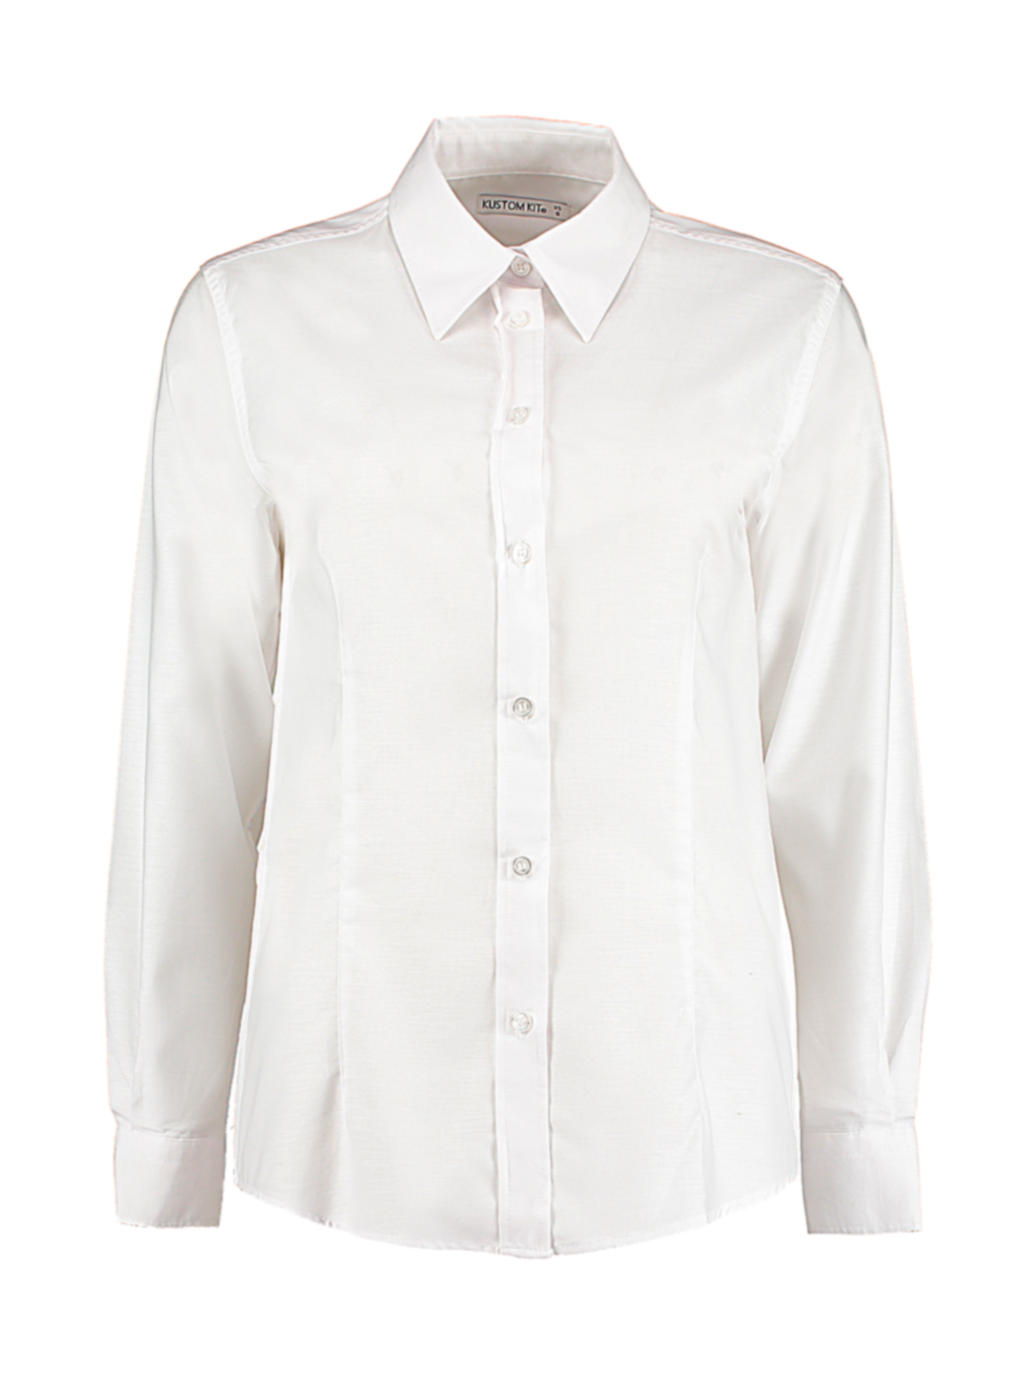 Women's Tailored Fit Workwear Oxford Shirt